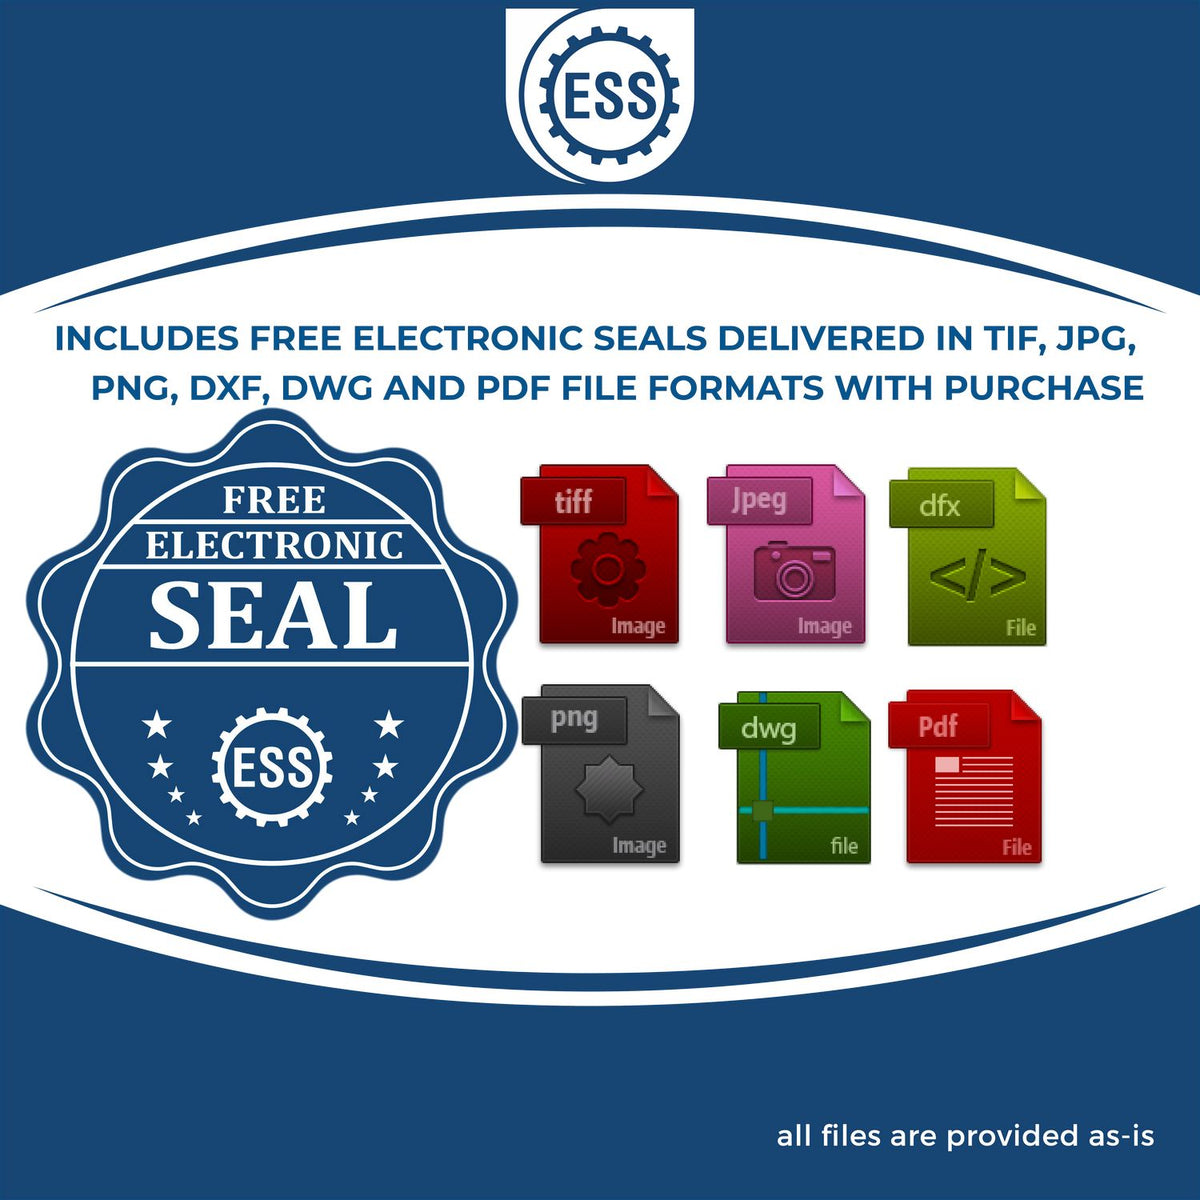 An infographic for the free electronic seal for the Gift Montana Land Surveyor Seal illustrating the different file type icons such as DXF, DWG, TIF, JPG and PNG.